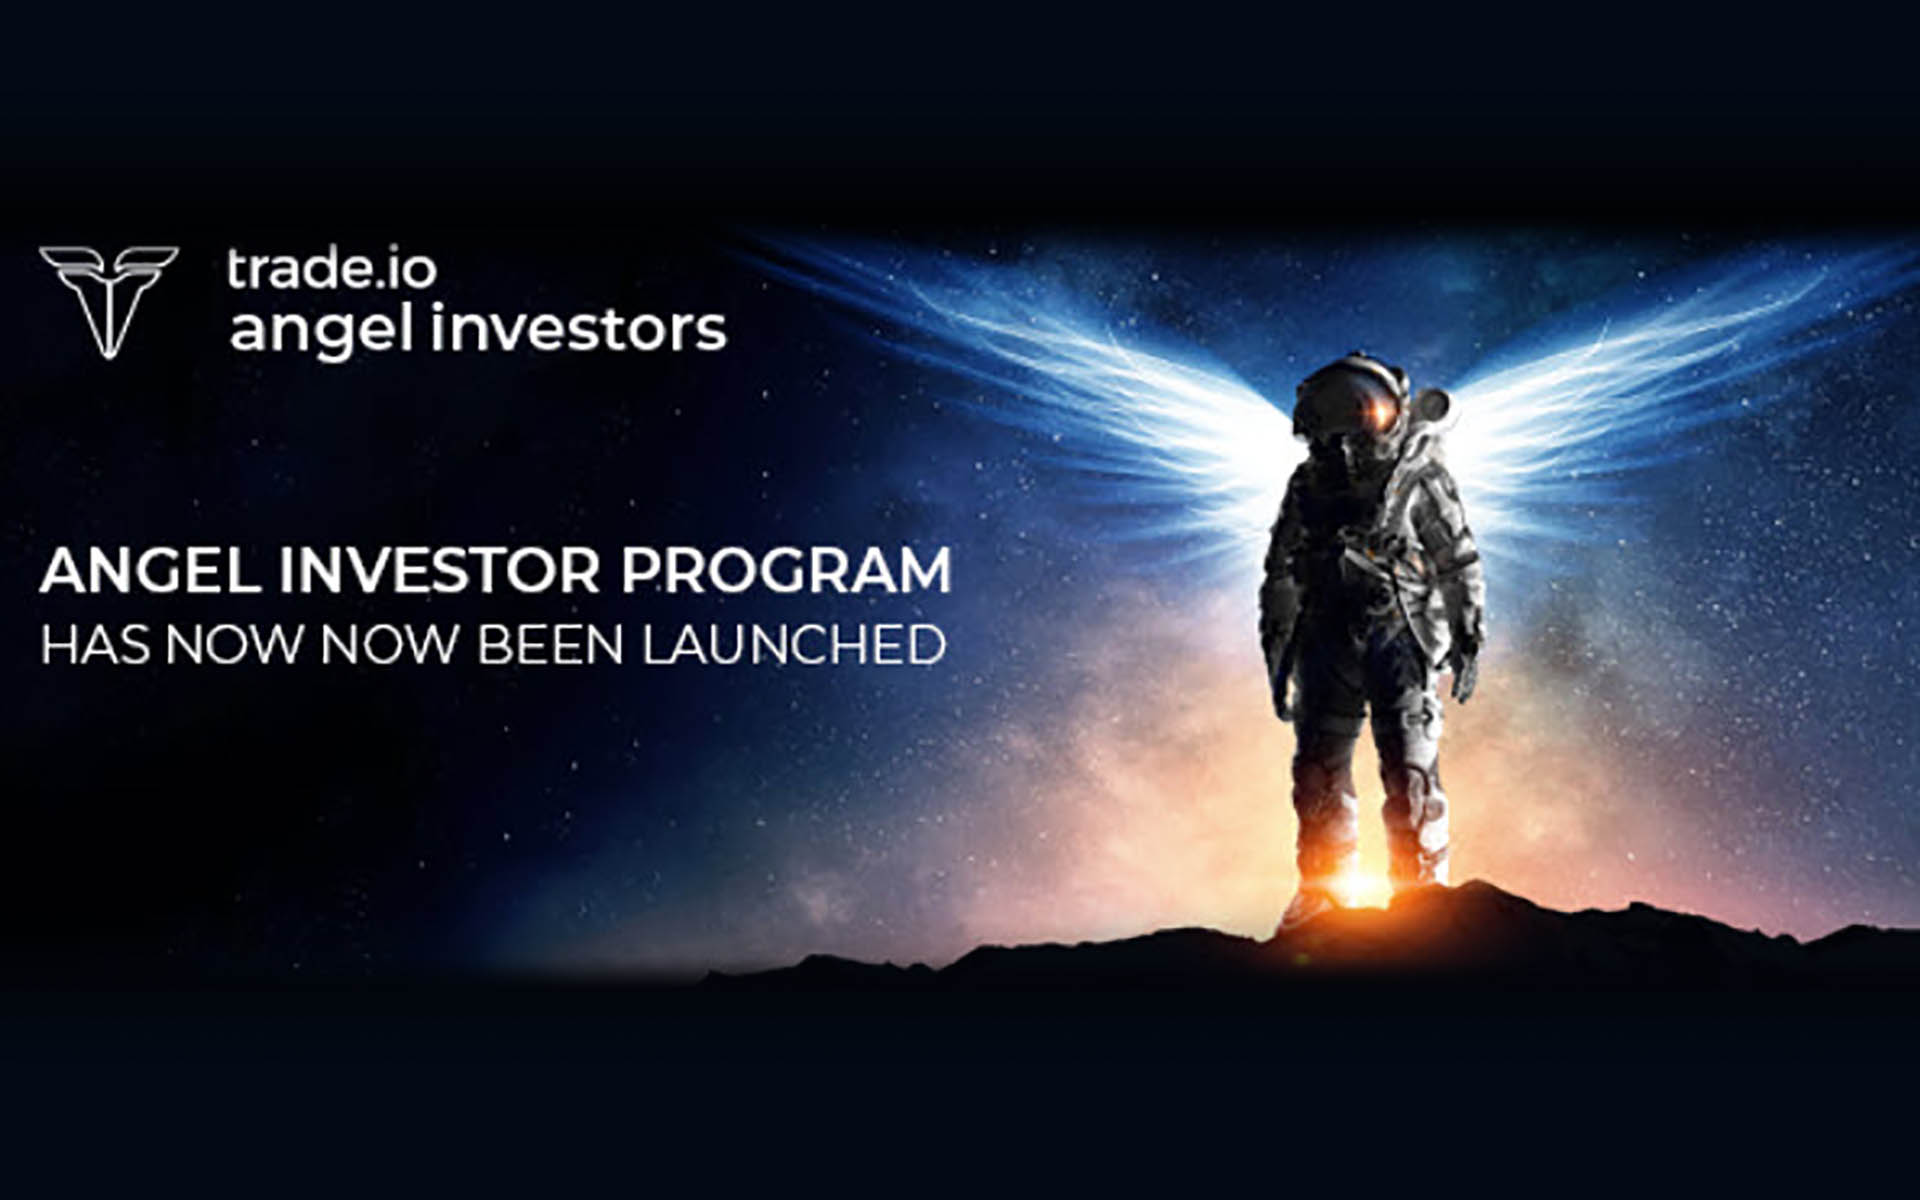 trade.io Launches Angel Investor Program – Over 300 Million USD For Potential Investment In trade.io Sponsored ICO Projects